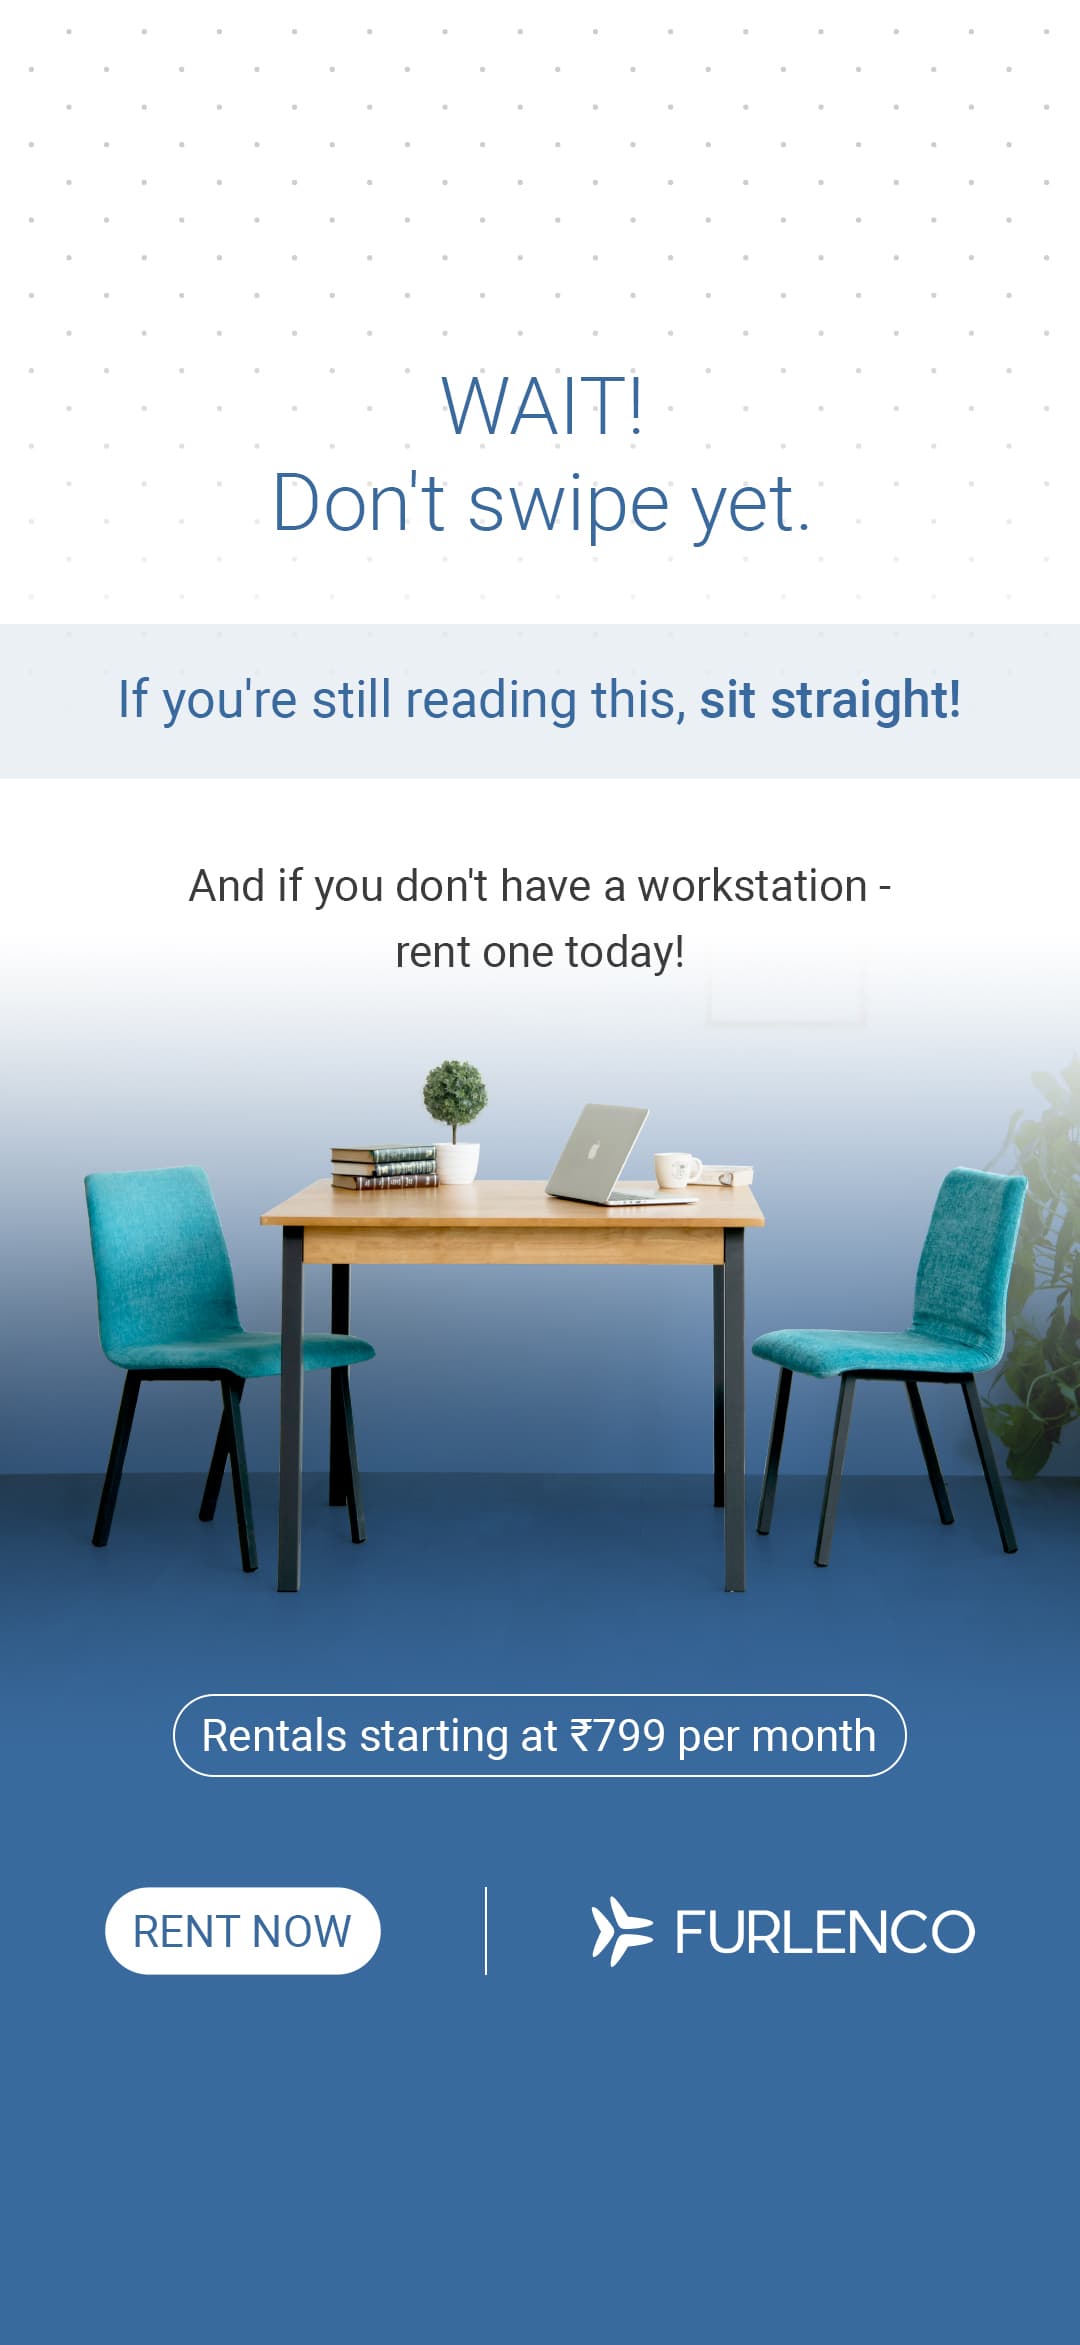 Furlenco | If You Are Still Reading This, Sit Straight!